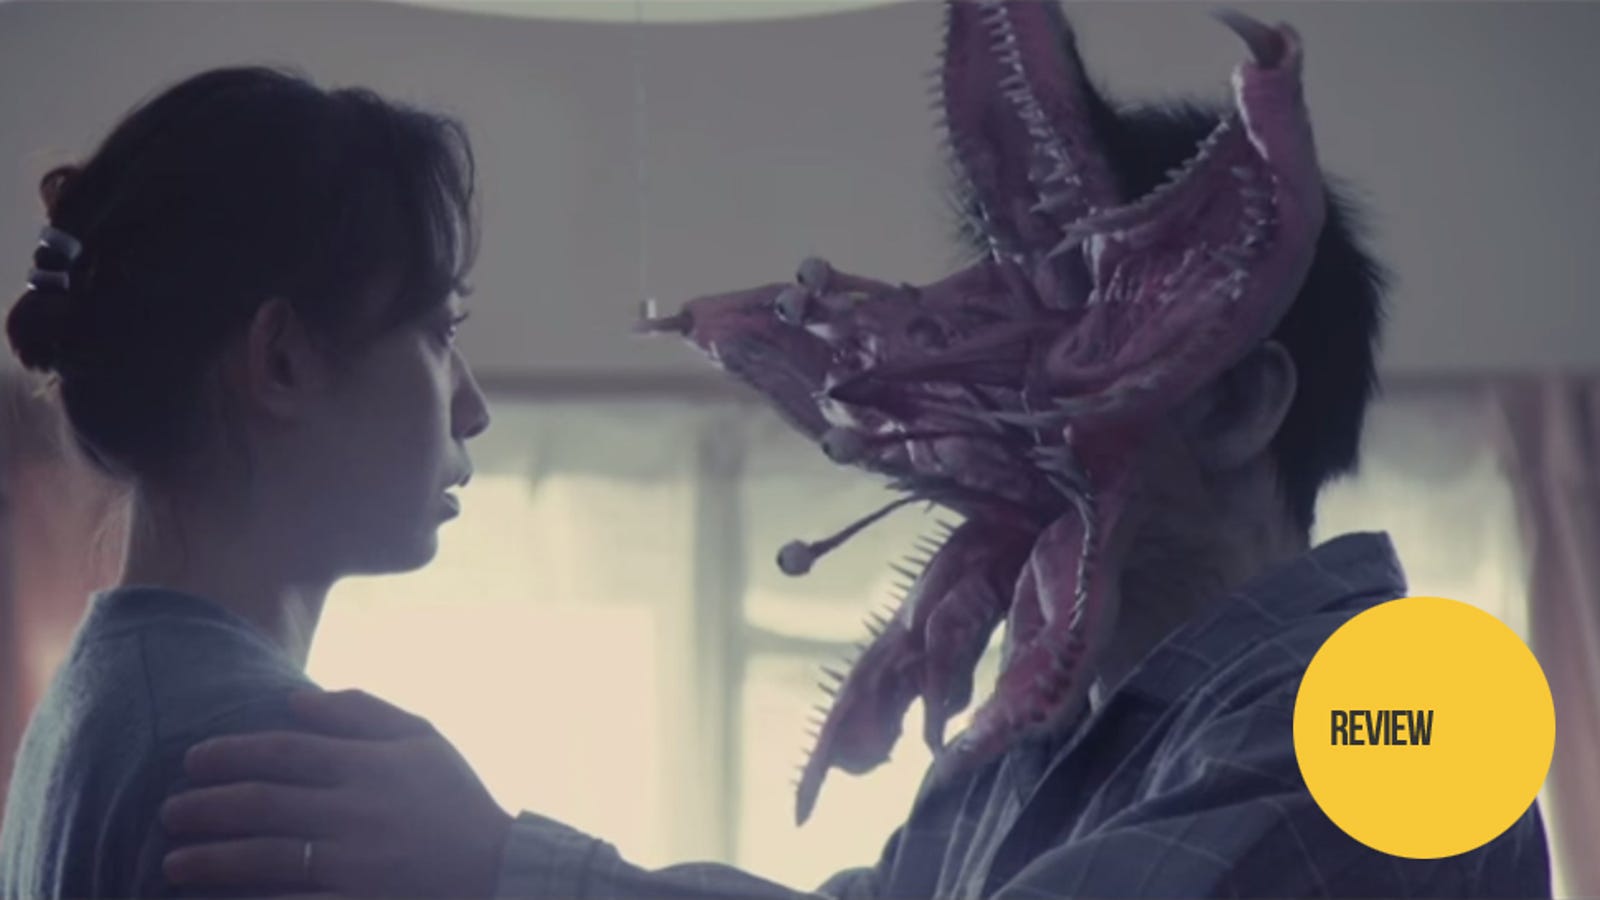 The First Parasyte Movie is an Insult to the Manga